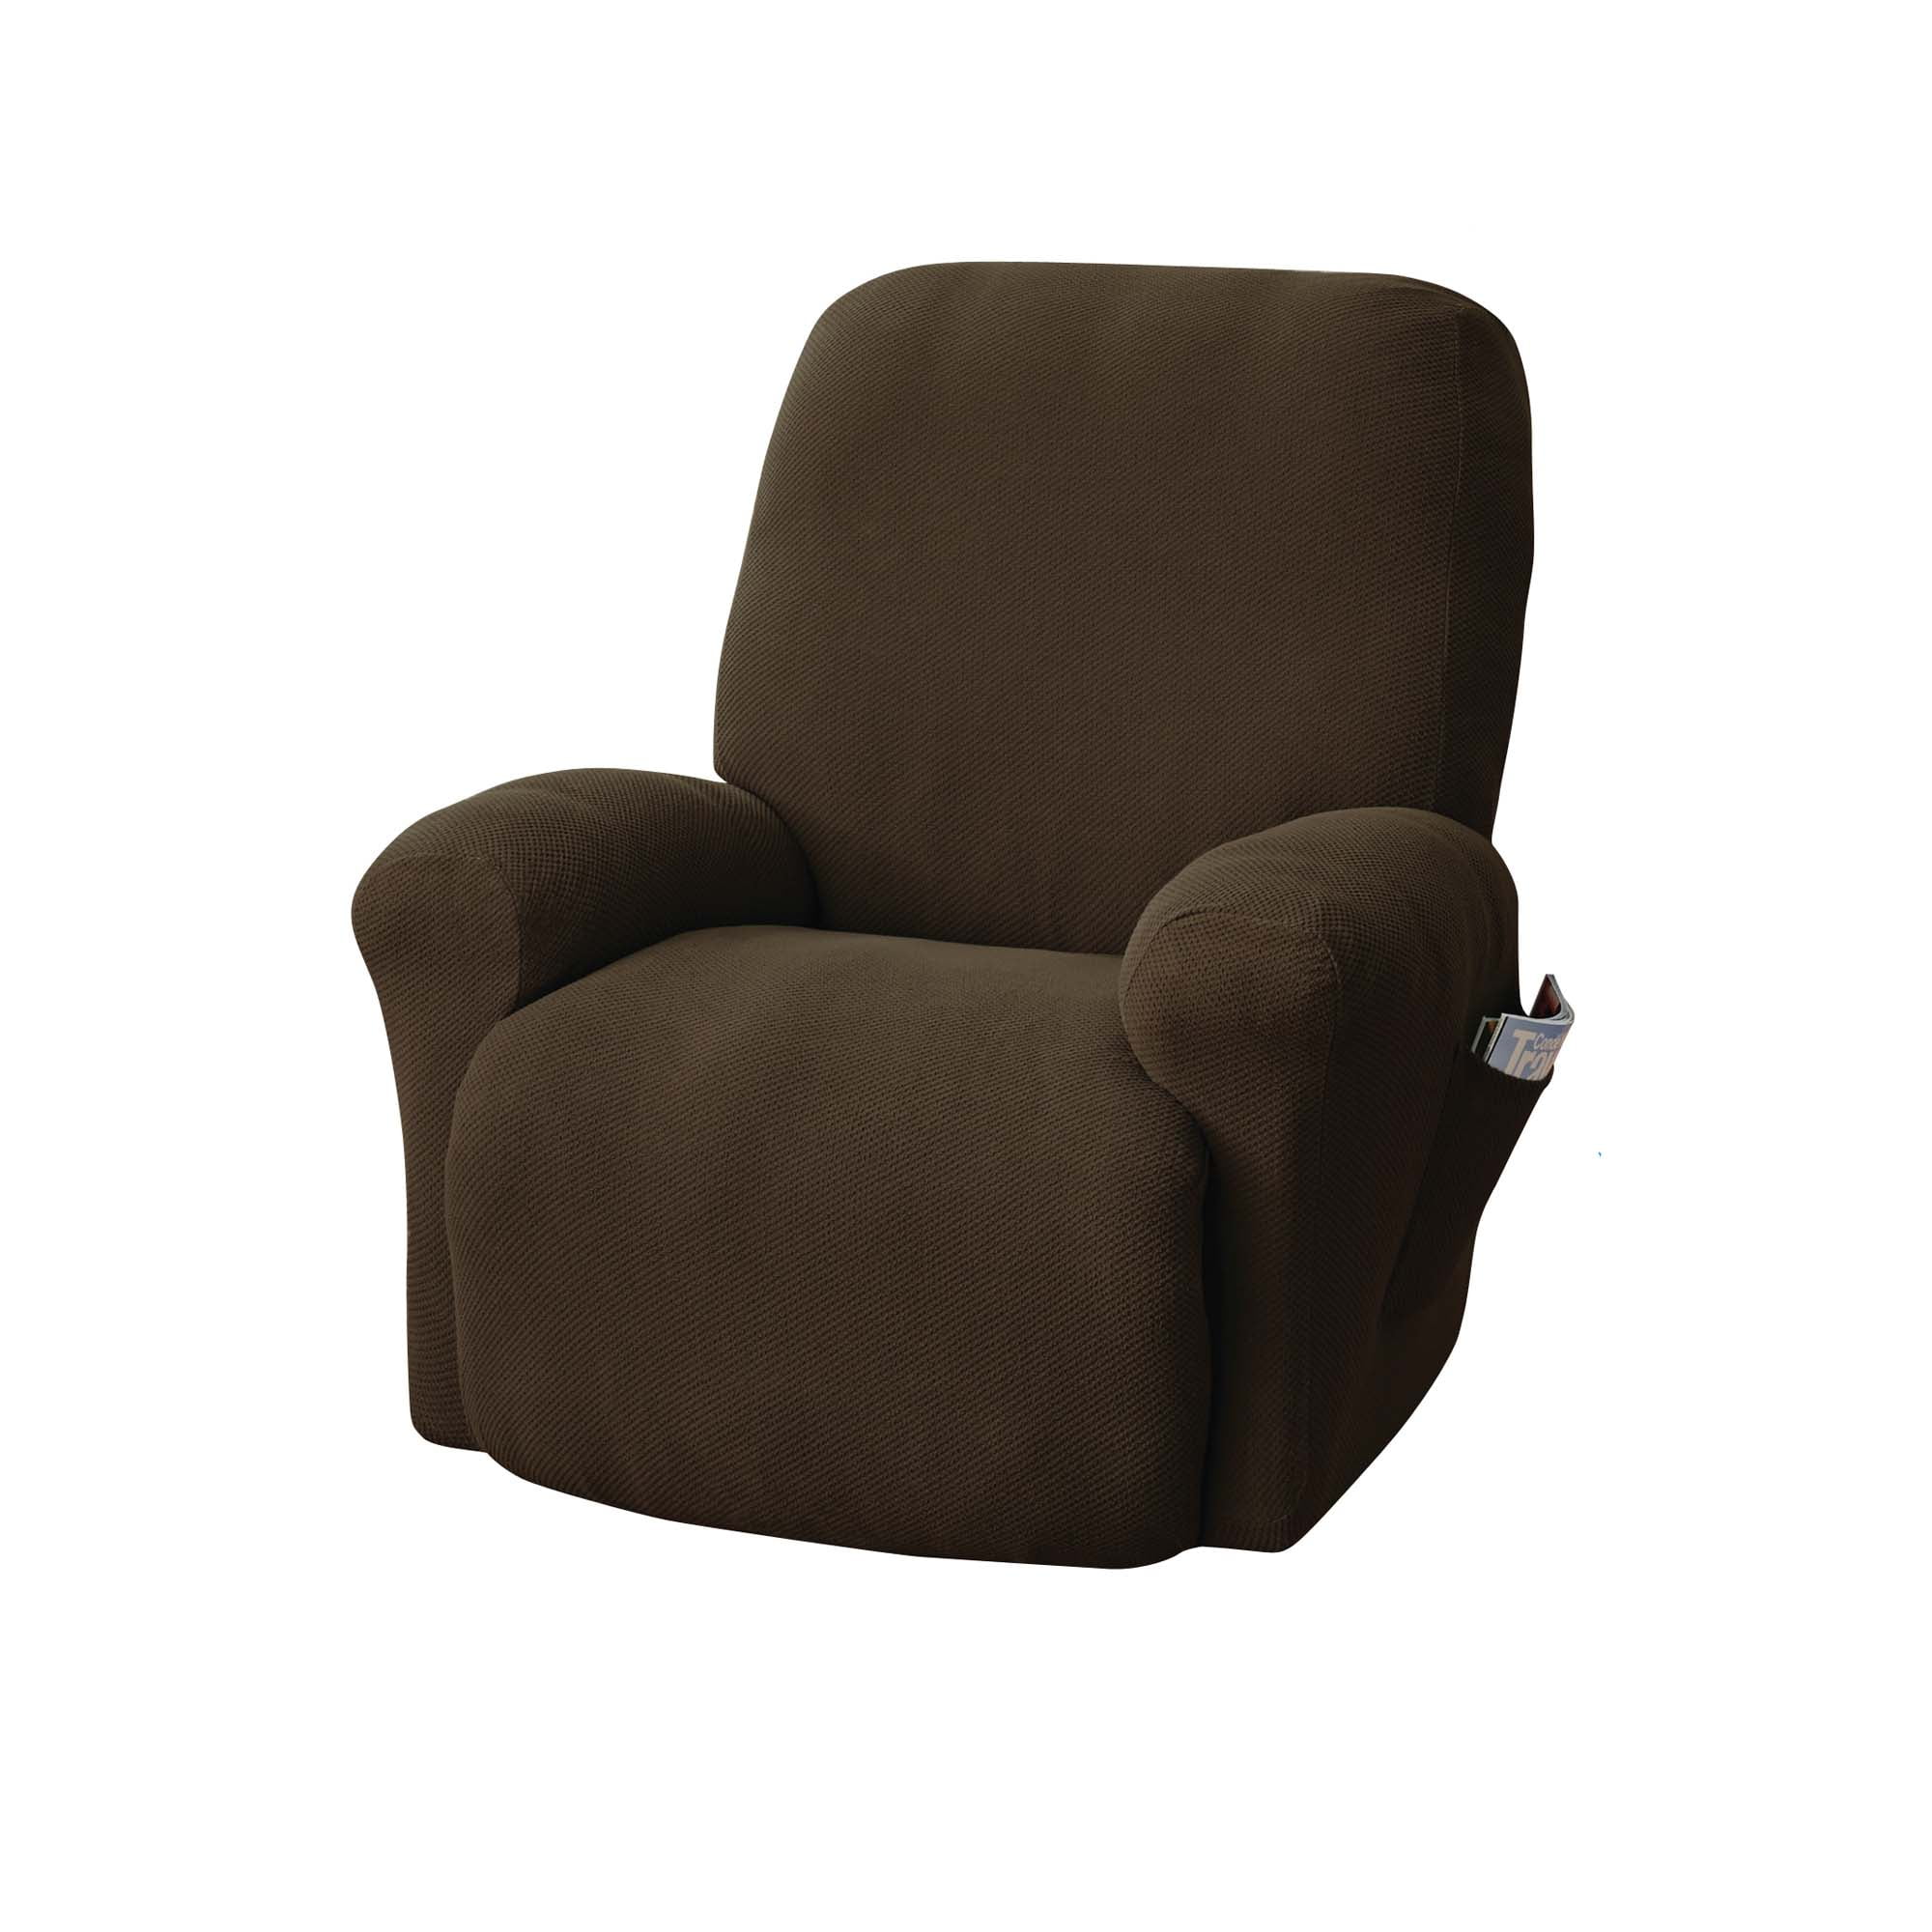 Size Chair/Recliner 98.5L x Furniture Covers Furniture Covers for Dogs and Pets Color Coffee Long Chair Cover Extra Long Arms Furniture Covers Size Chair/Recliner Coffee 98.5L x 109W 